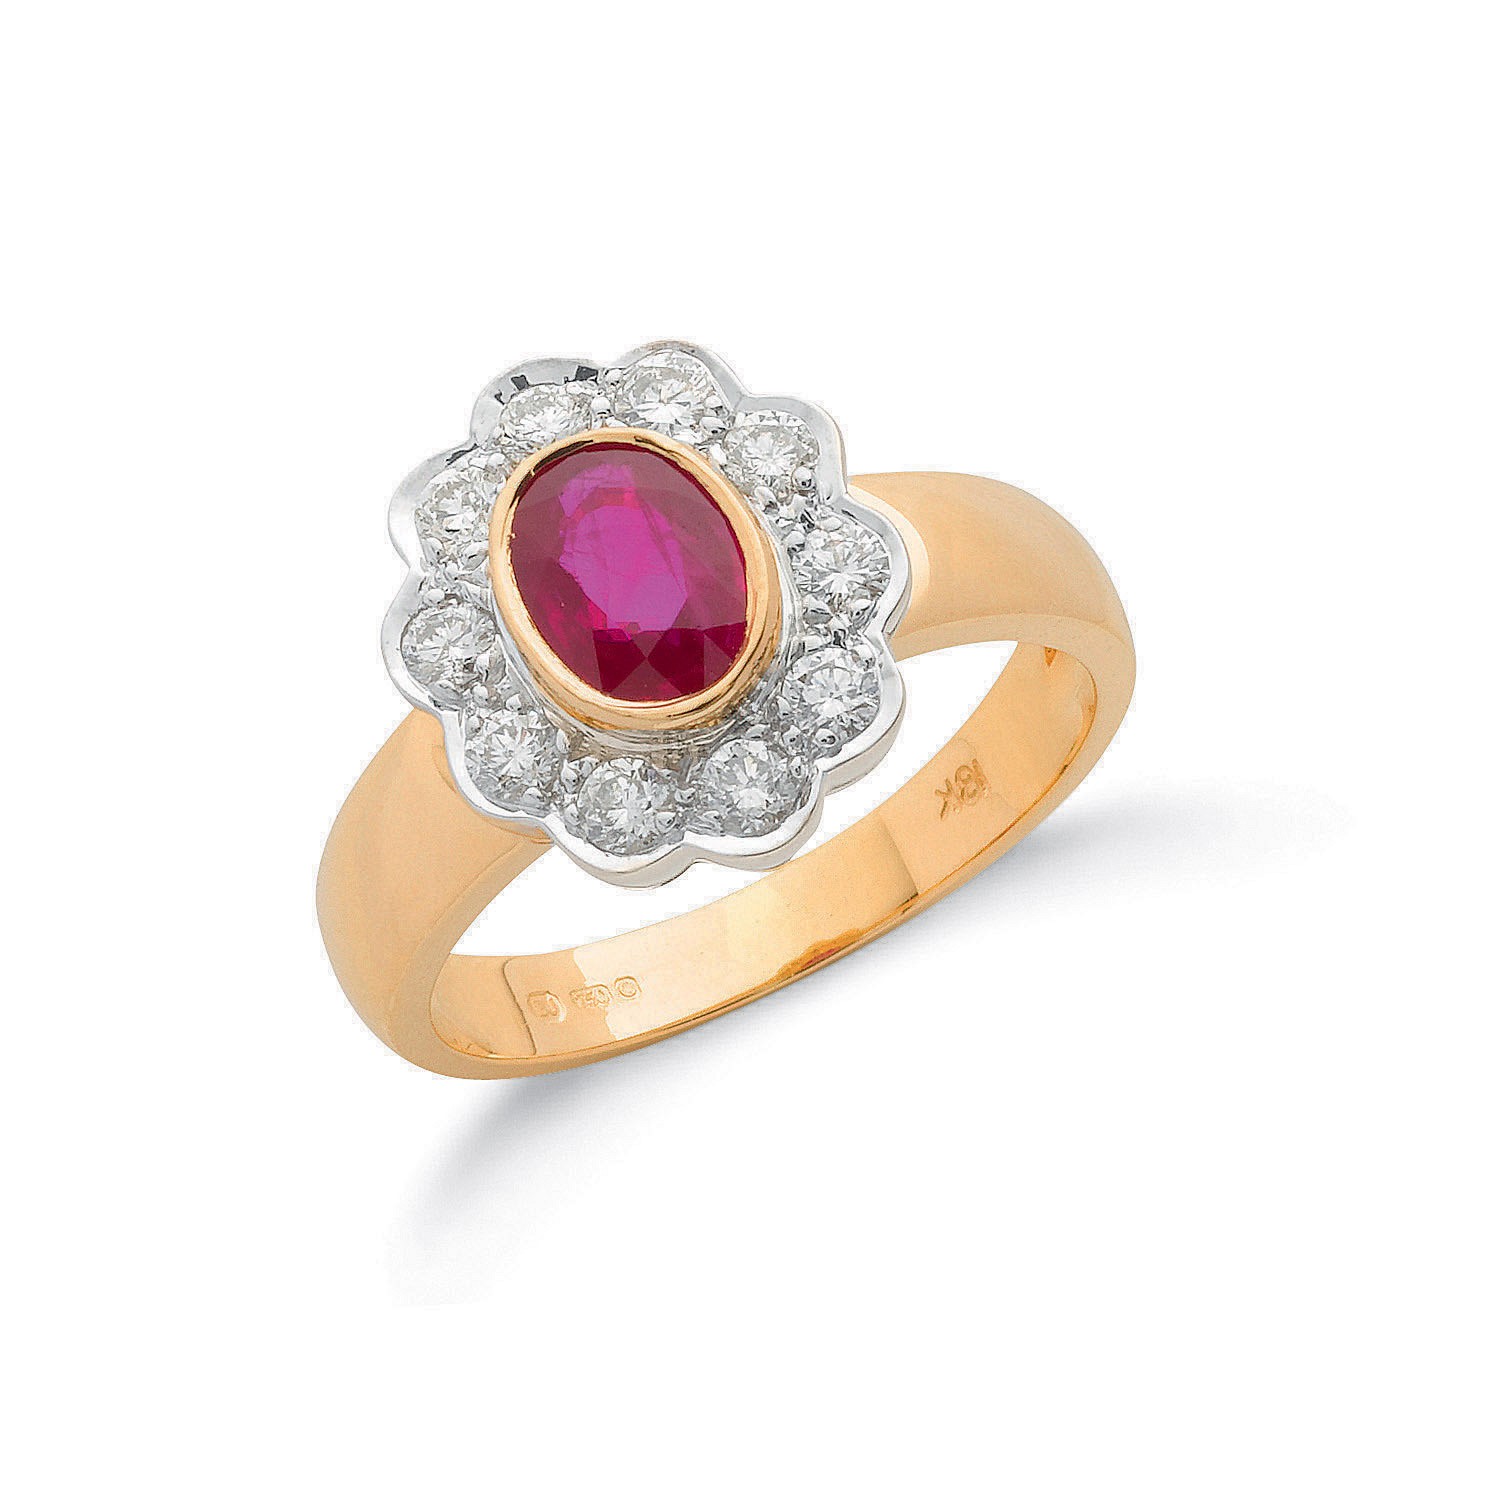 1.00 Carat Classic Oval Cut Flower Style Ruby And Diamond Set Ring